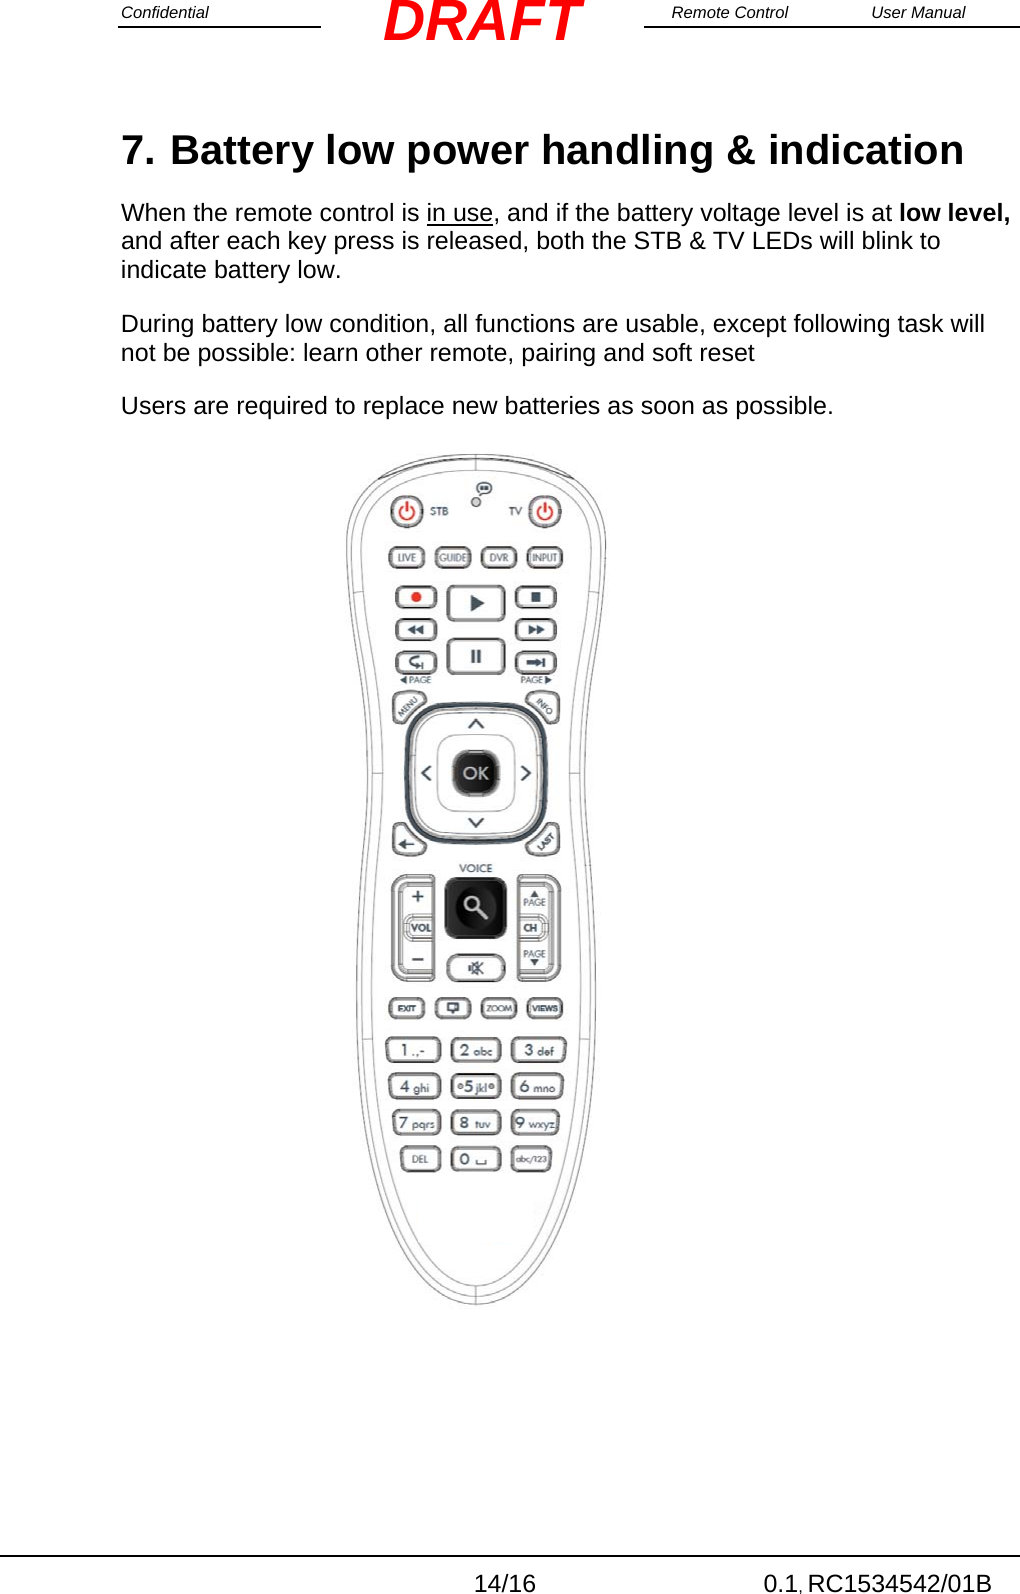 Confidential                                                                                                    Remote Control  User Manual  14/16 0.1, RC1534542/01B DRAFT7. Battery low power handling &amp; indication When the remote control is in use, and if the battery voltage level is at low level, and after each key press is released, both the STB &amp; TV LEDs will blink to indicate battery low.    During battery low condition, all functions are usable, except following task will not be possible: learn other remote, pairing and soft reset Users are required to replace new batteries as soon as possible.                                  